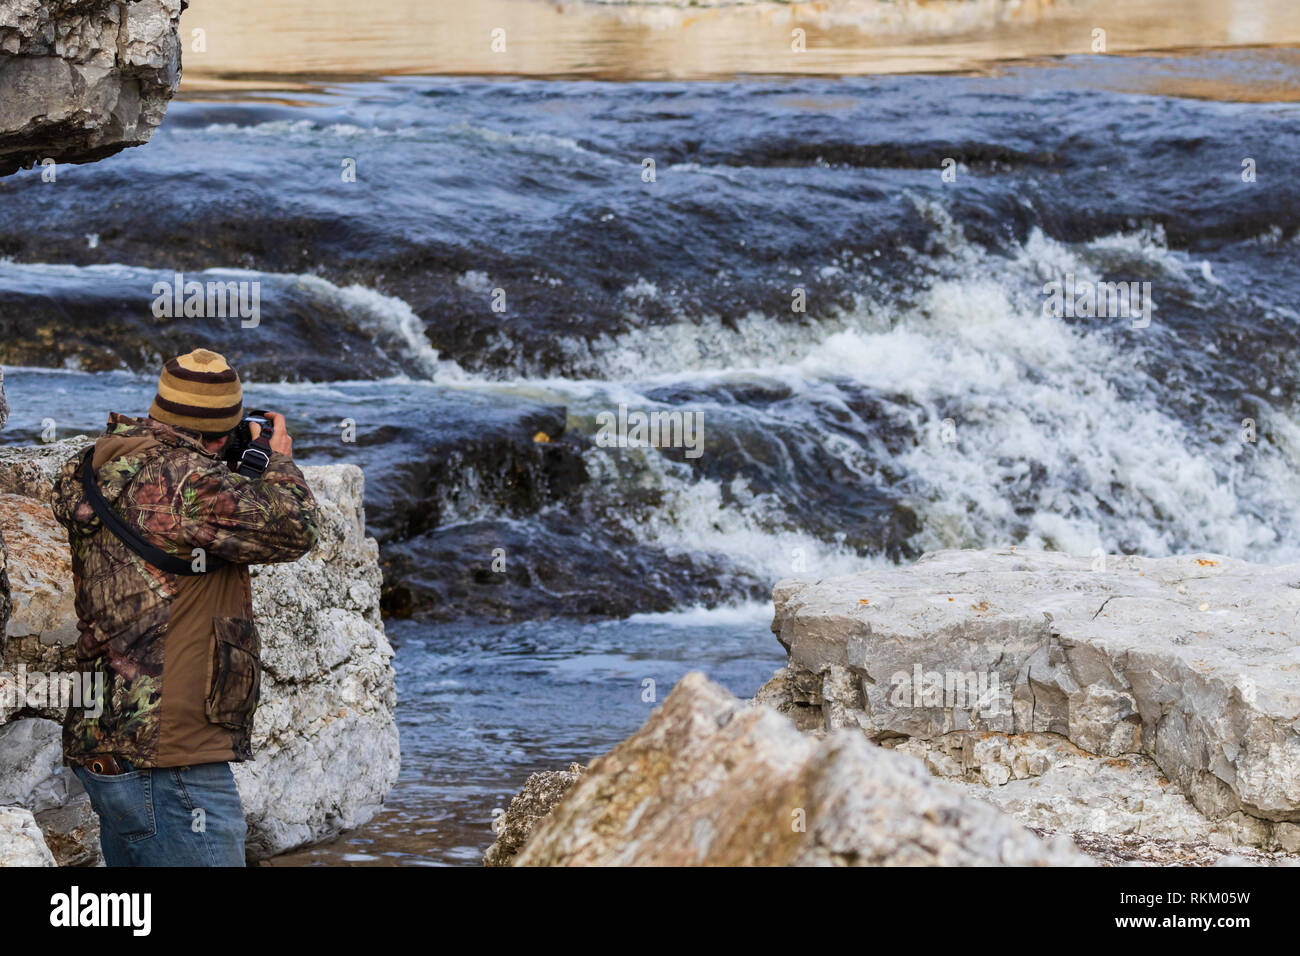 A 43 year old man taking a picture of the raging water near the Pensacola Dam located in Langley, Oklahoma 2019 Stock Photo